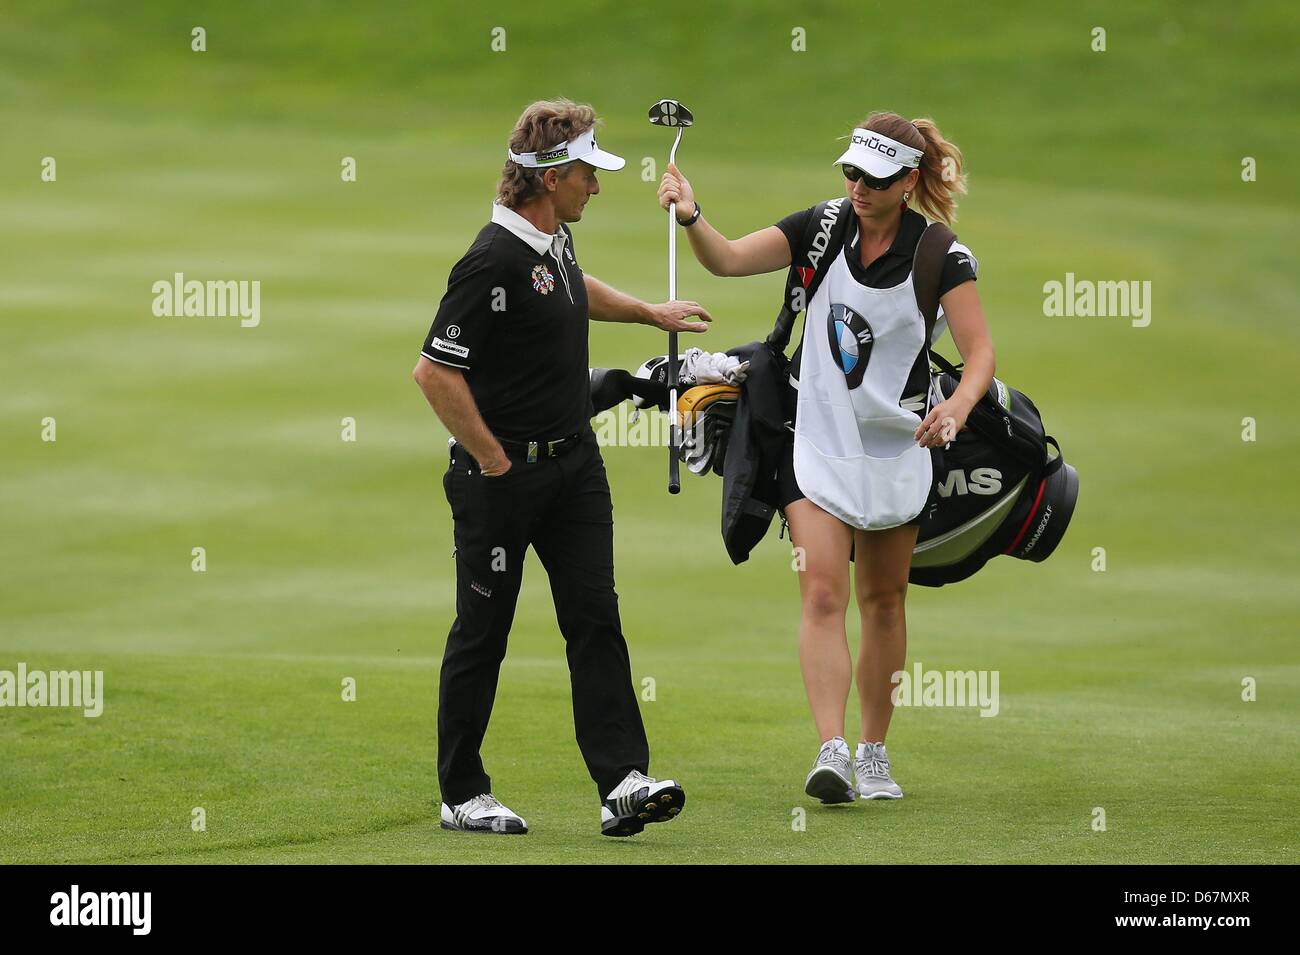 Bernhard Langer High Resolution Stock Photography and Images - Alamy